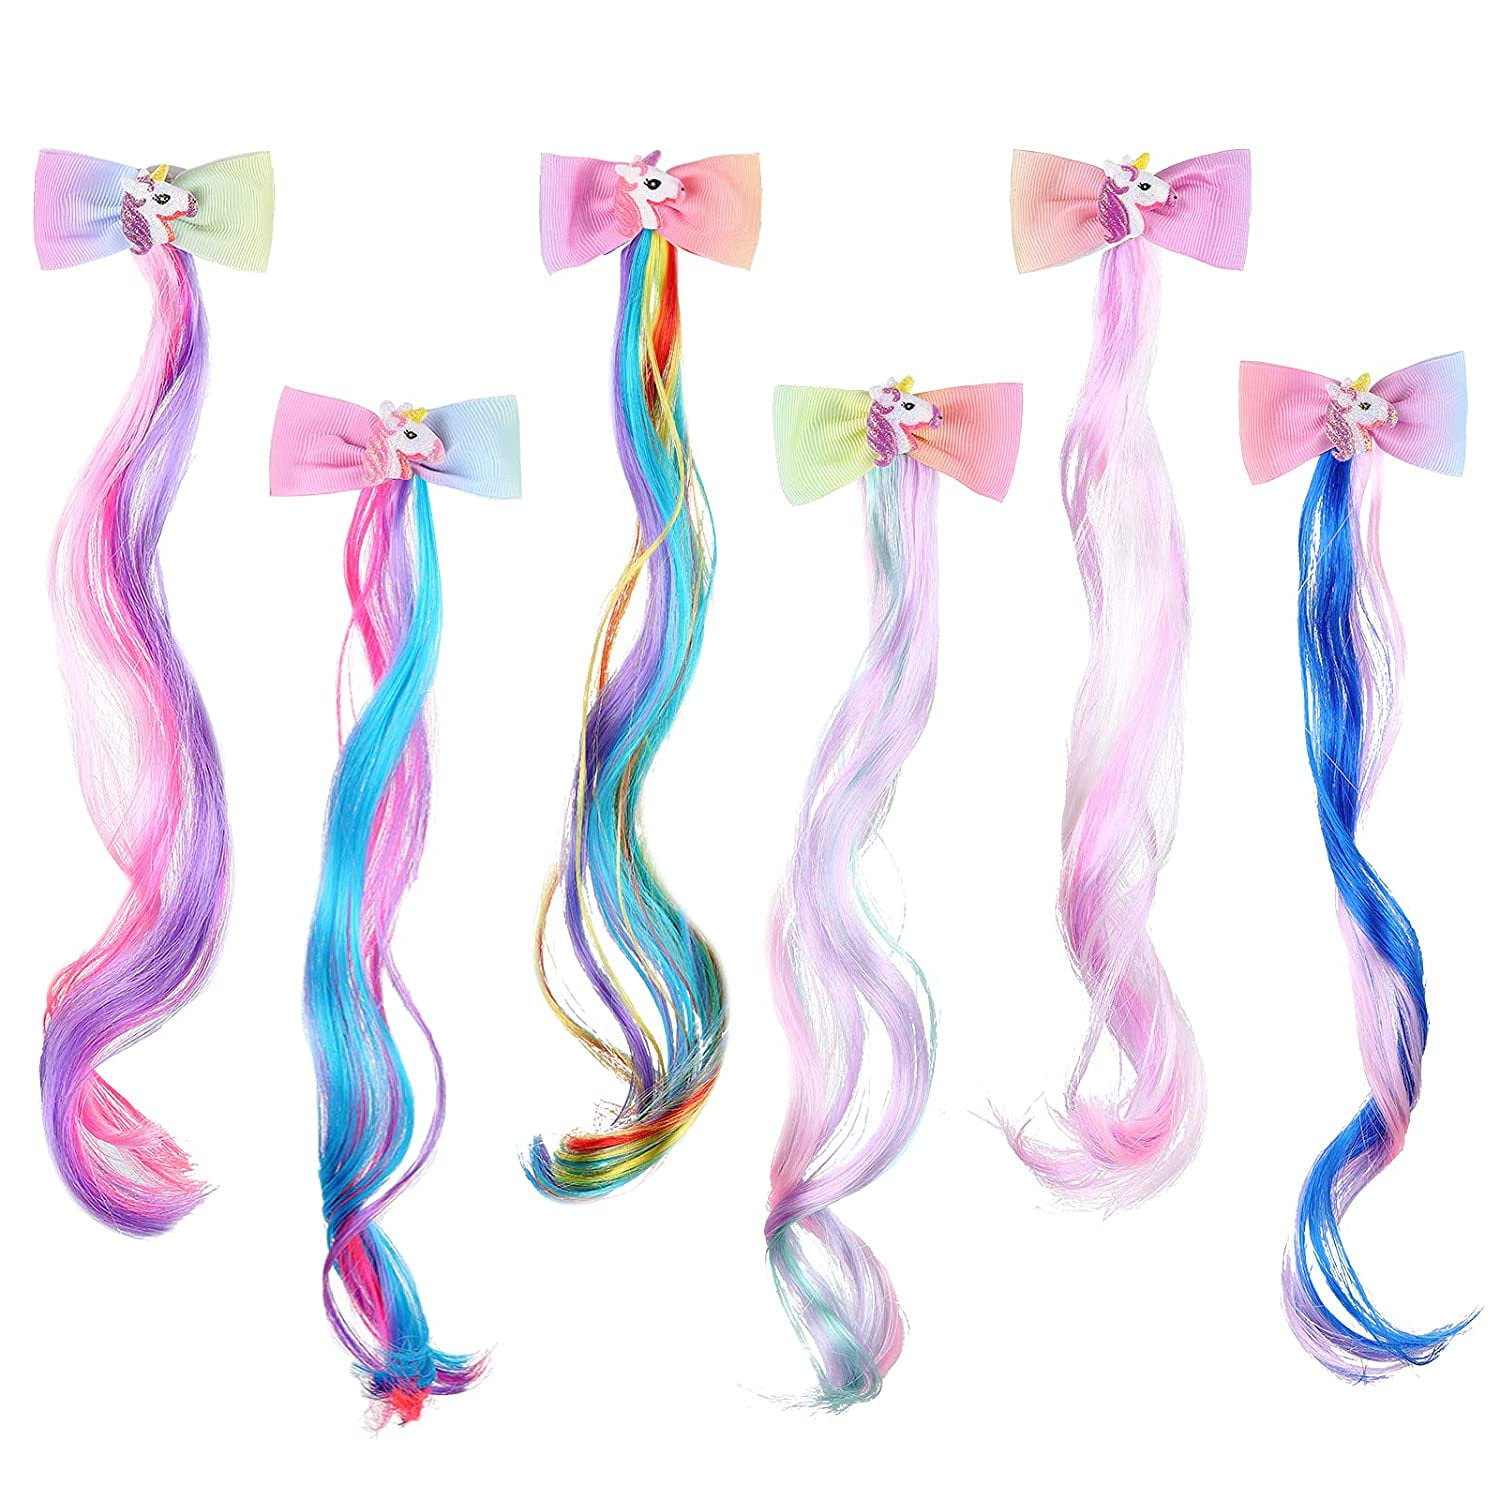  Beavorty 60 pcs hollow hair clip hair accessories colorful  hair clip hair accessories for girls 4-6 bows kids hair clips girls hair  clips for kids ages 4-8 toddler iron issue